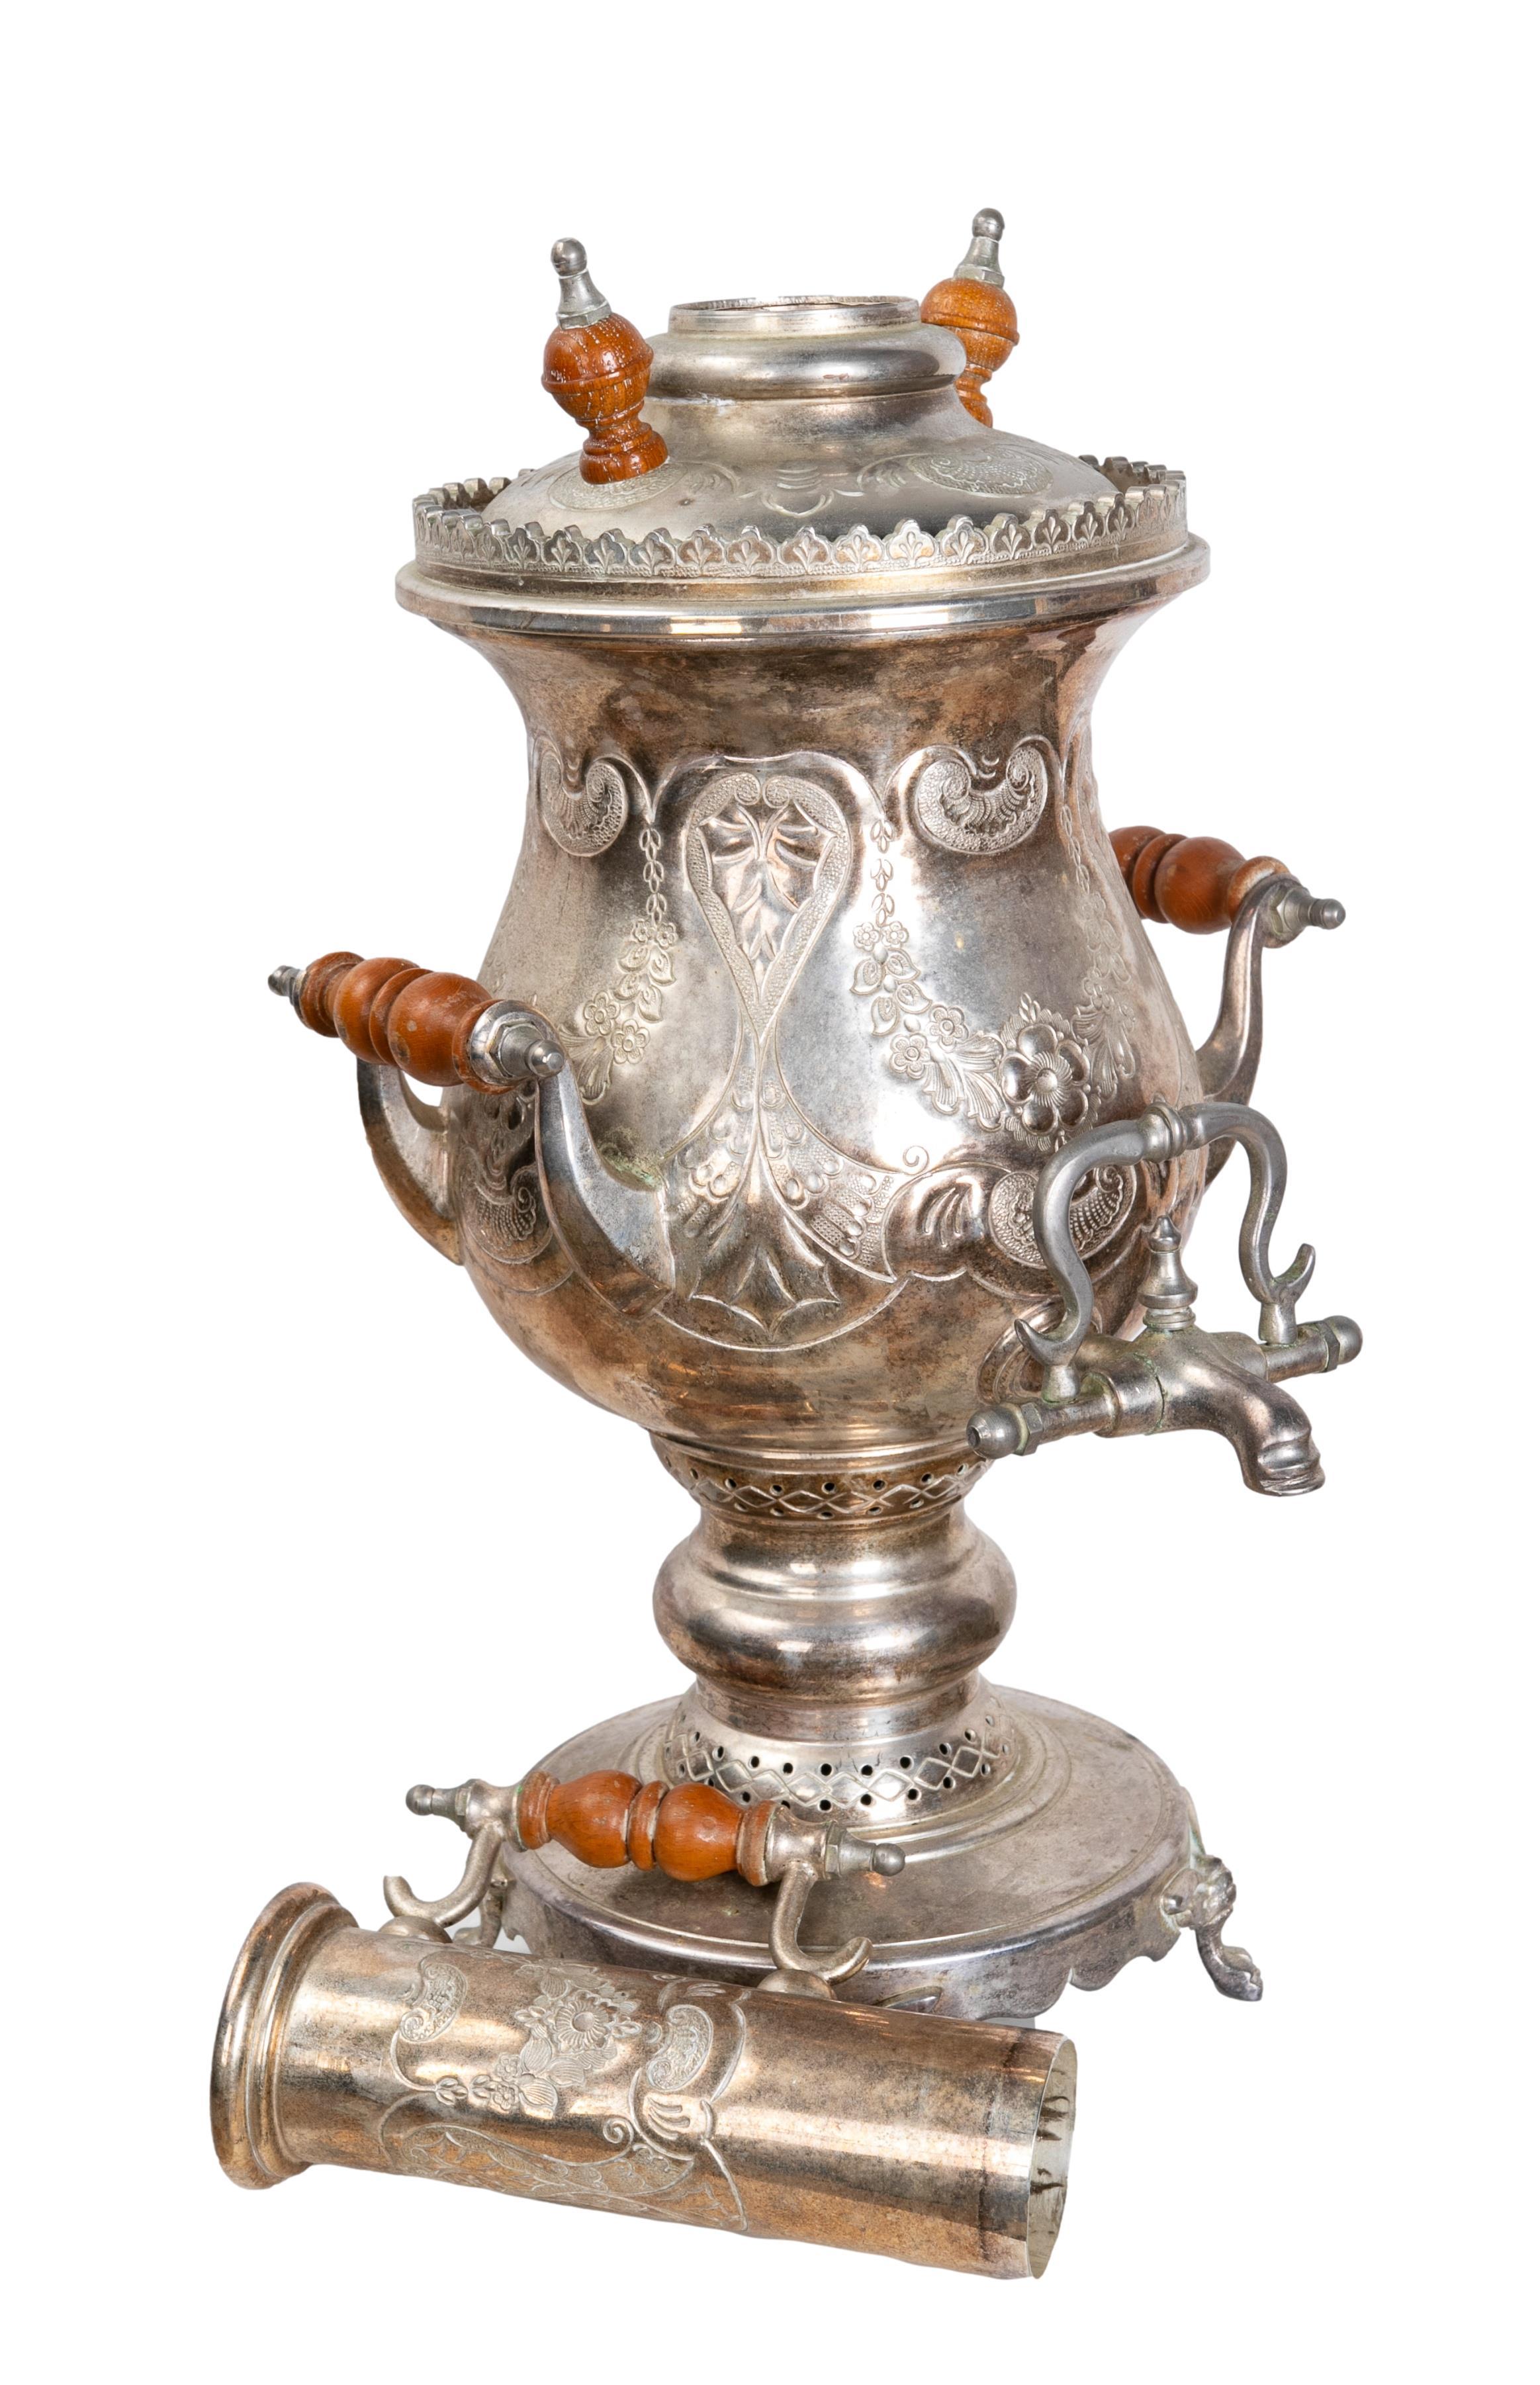 1980s Moroccan Silver-Plated Metal Samovar with Wooden Handles 7